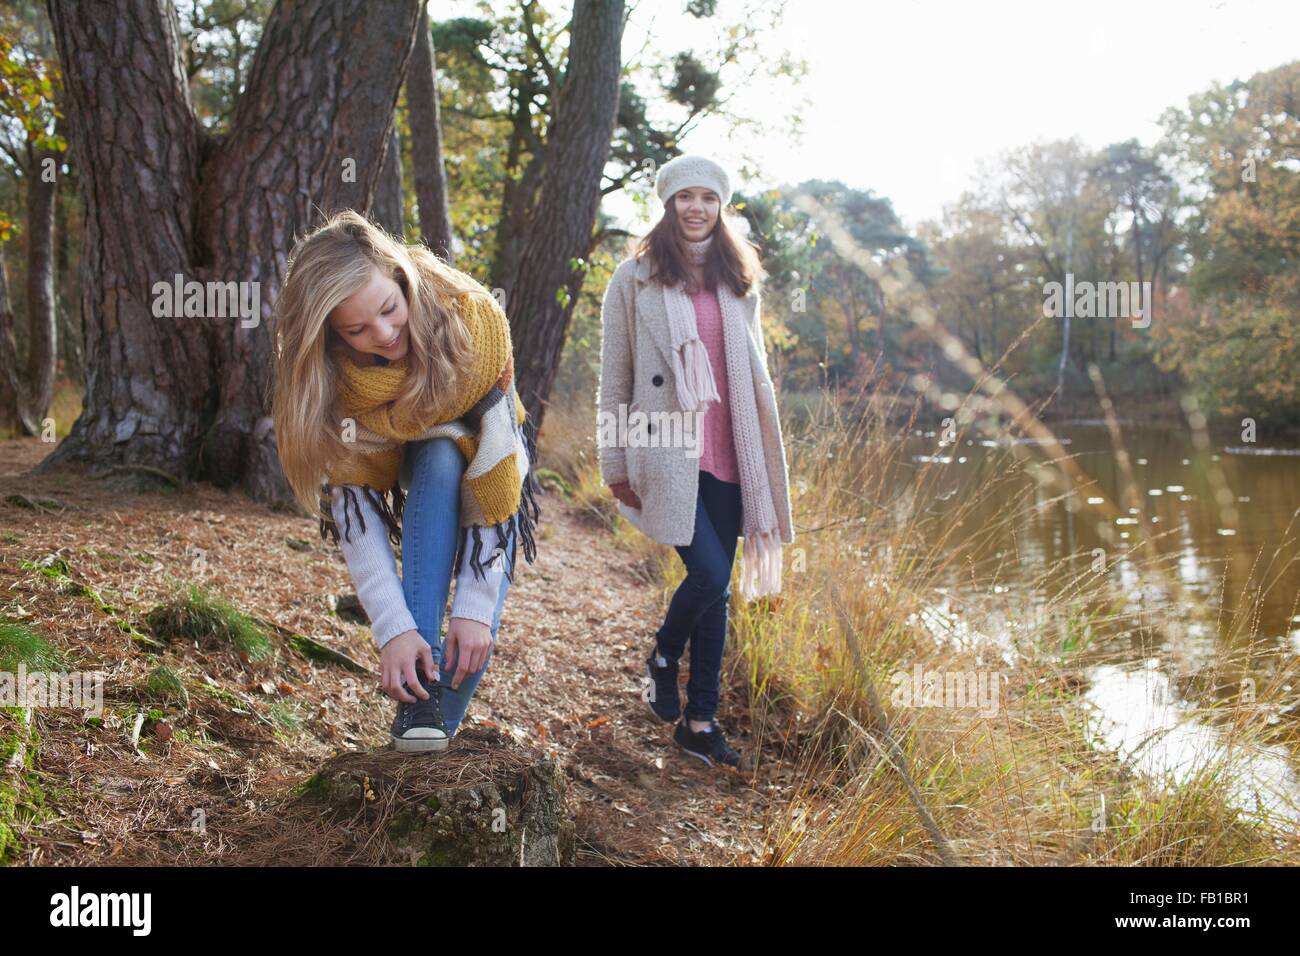 Teenage girls with friend on riverbank bending over tying shoelace Stock Photo